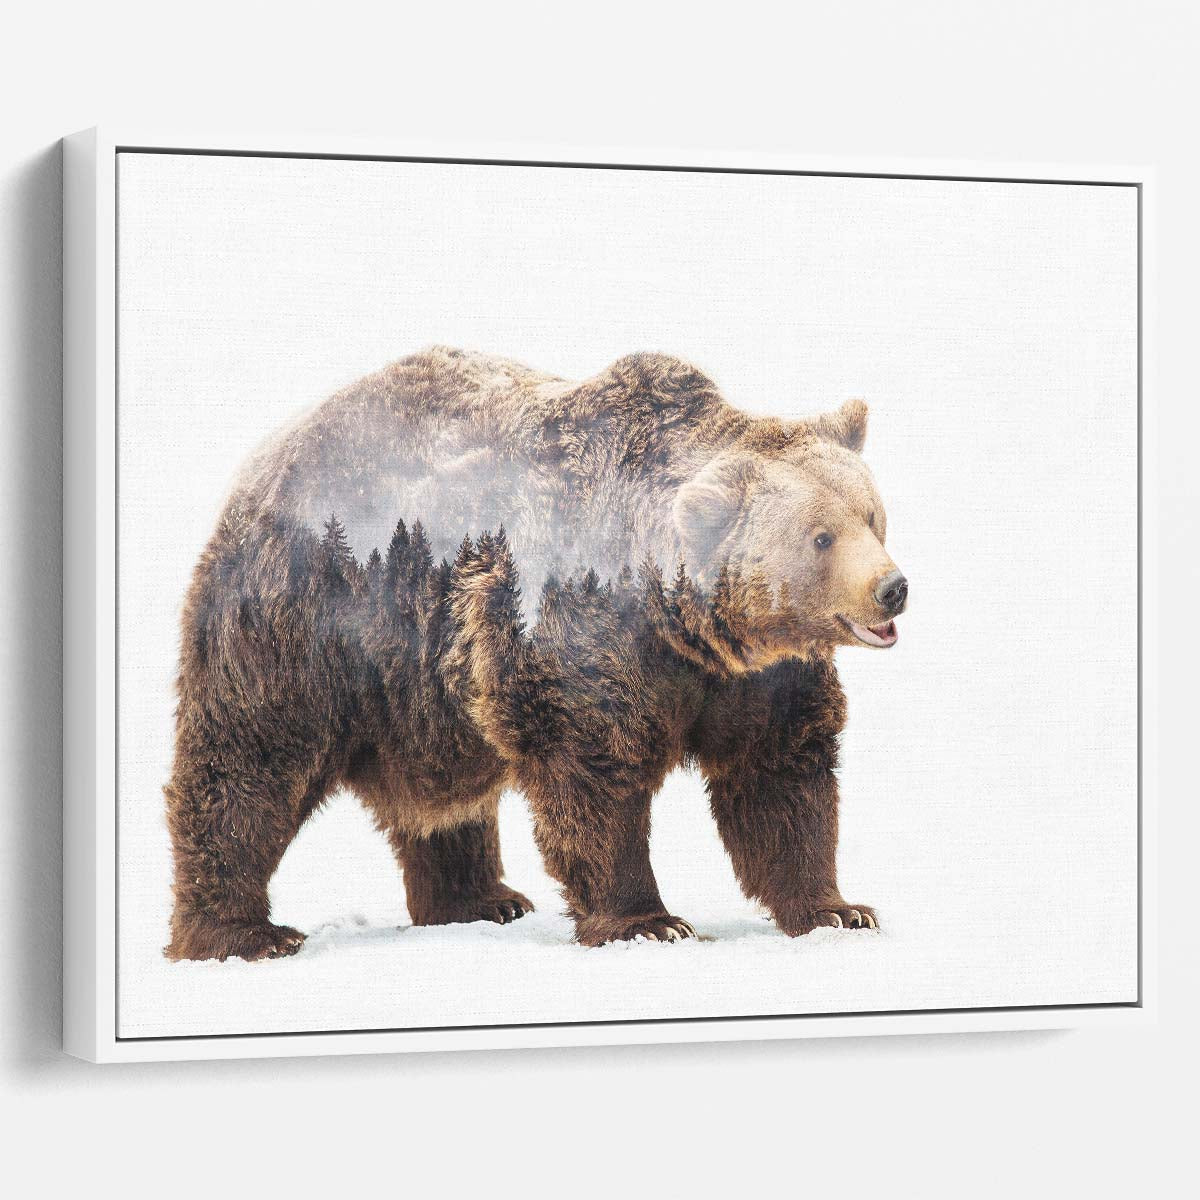 Foggy Forest Bear Double Exposure Wall Art by Luxuriance Designs. Made in USA.